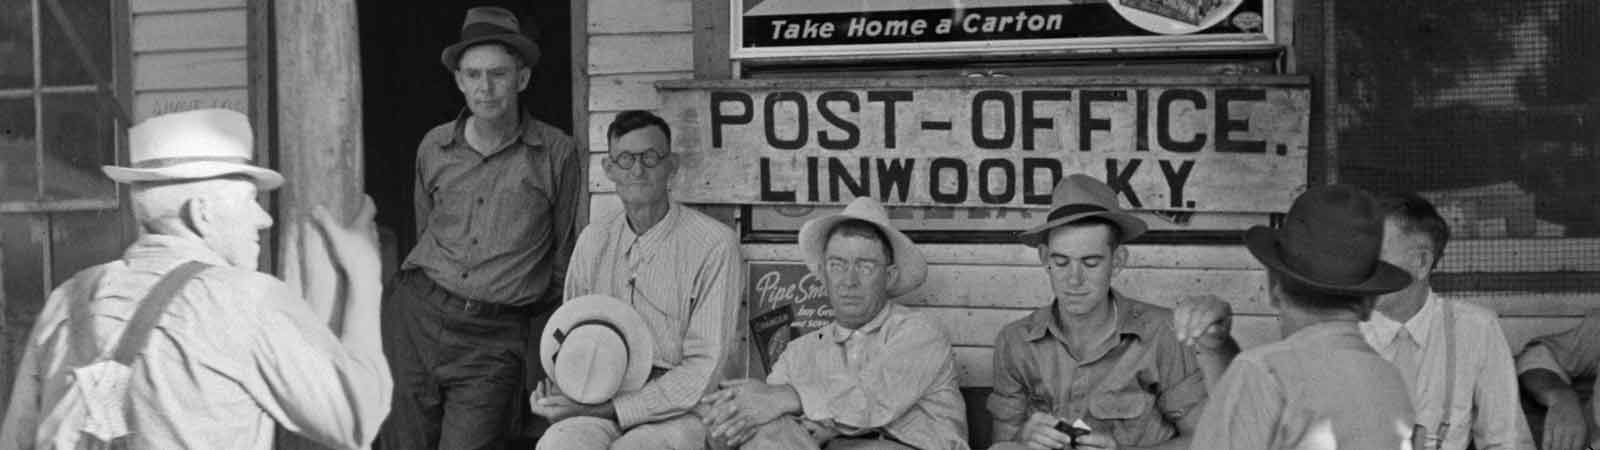 marion-post-wolcott-front-of-the-post-office-1600×450